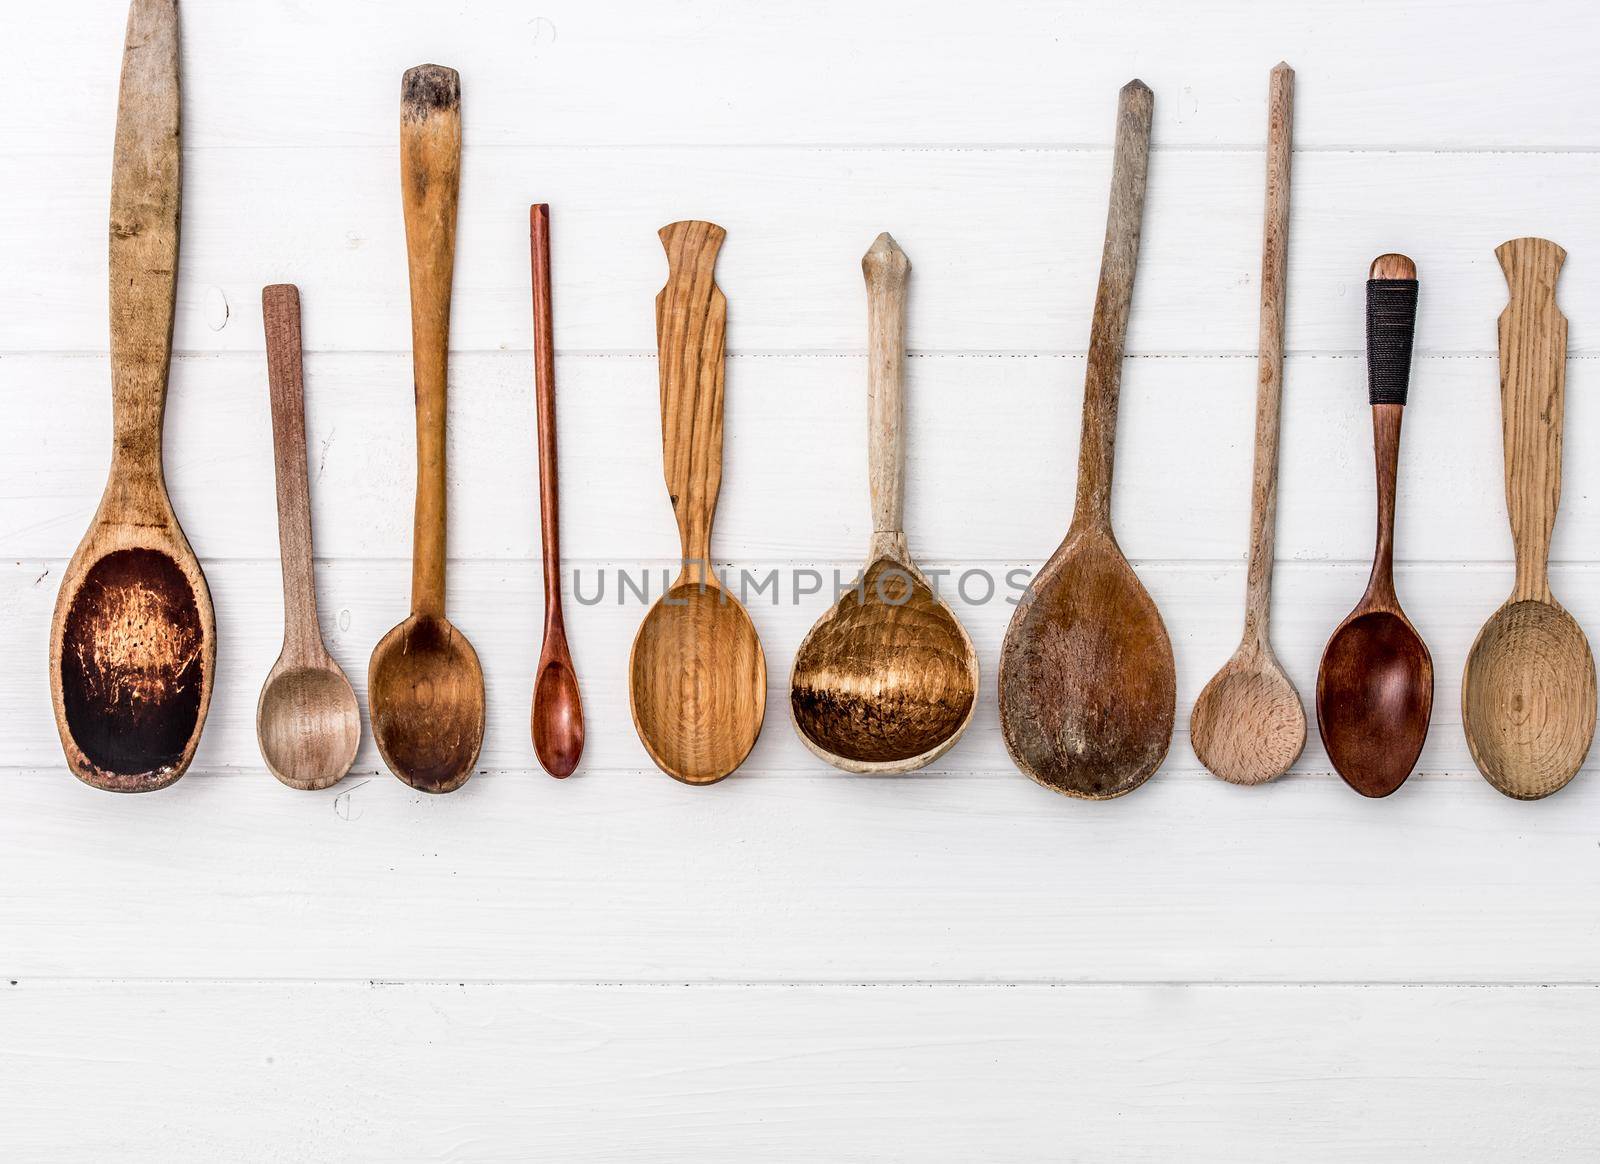 Hand-carved wooden spoons on white wooden background. Wooden kitchenware. Place for text, copyspace. Top view